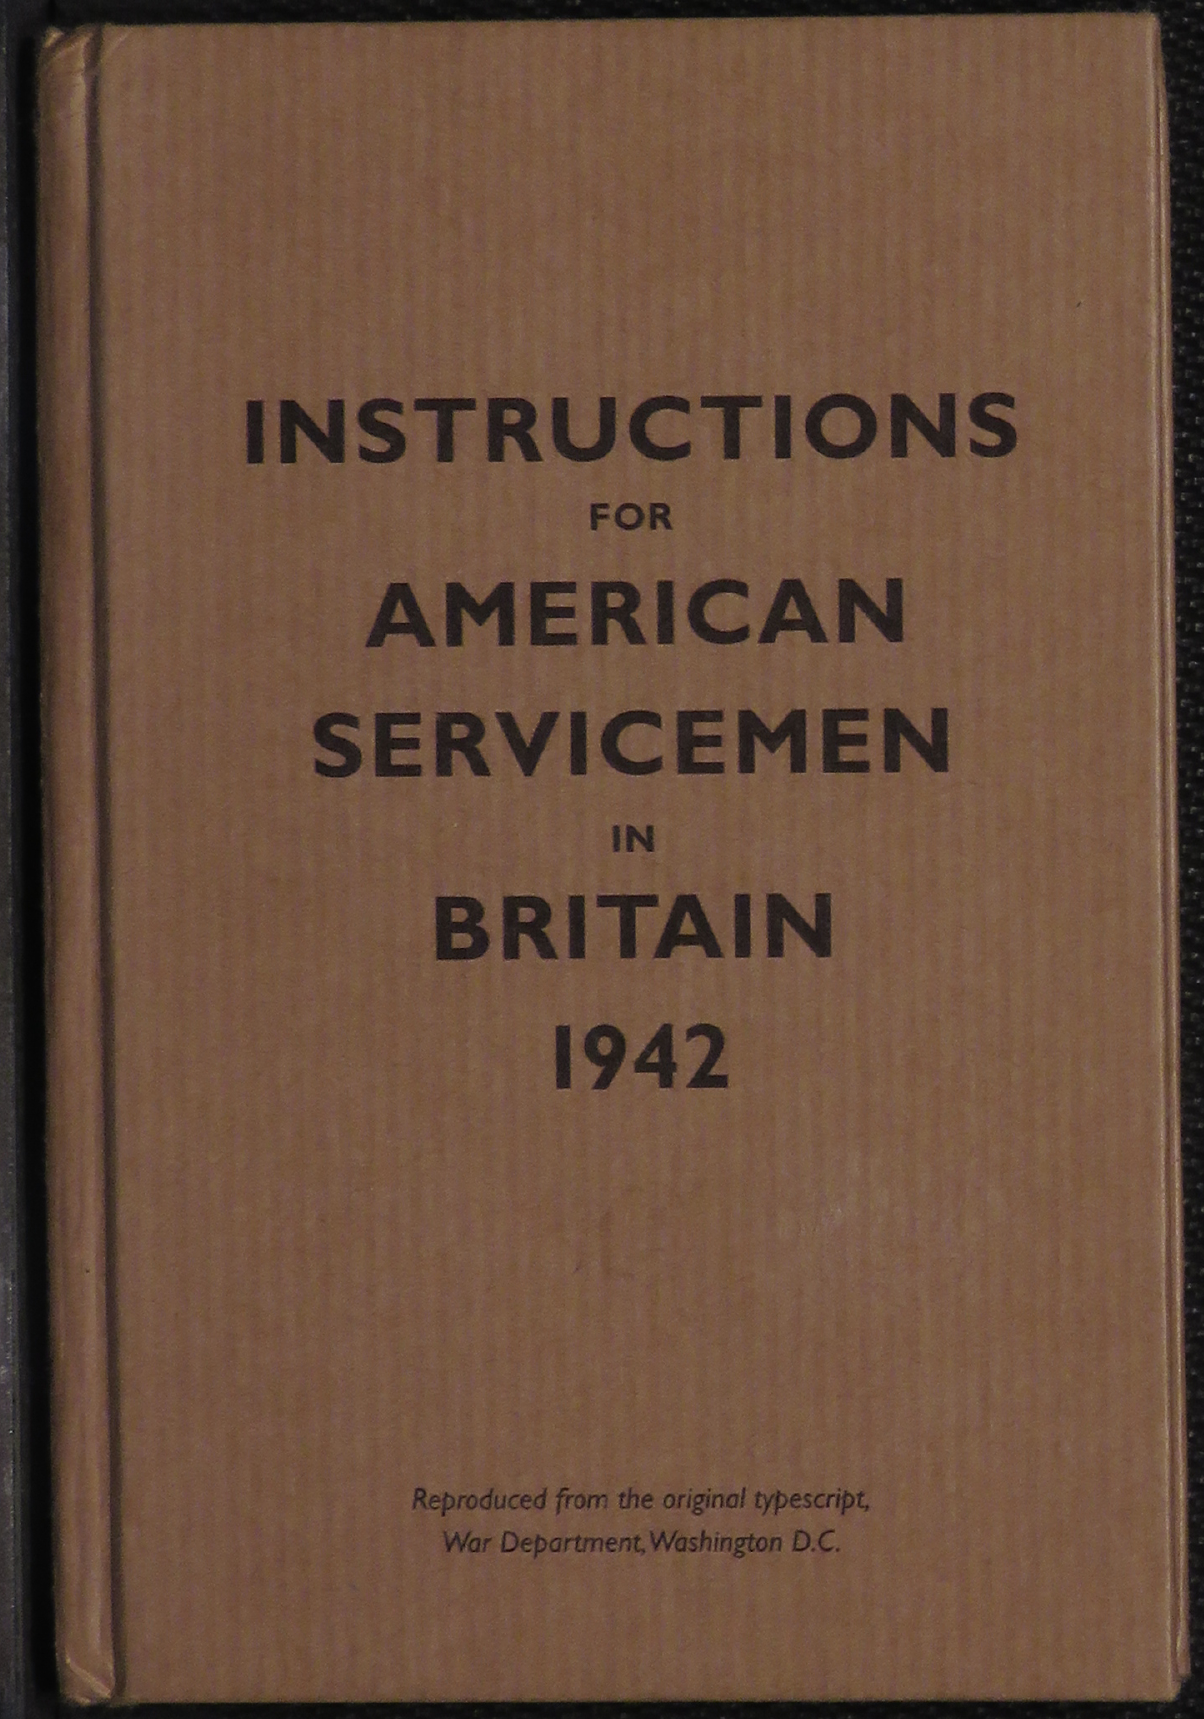 Sample page 1 from AirCorps Library document: Instructions for American Servicemen in Britain